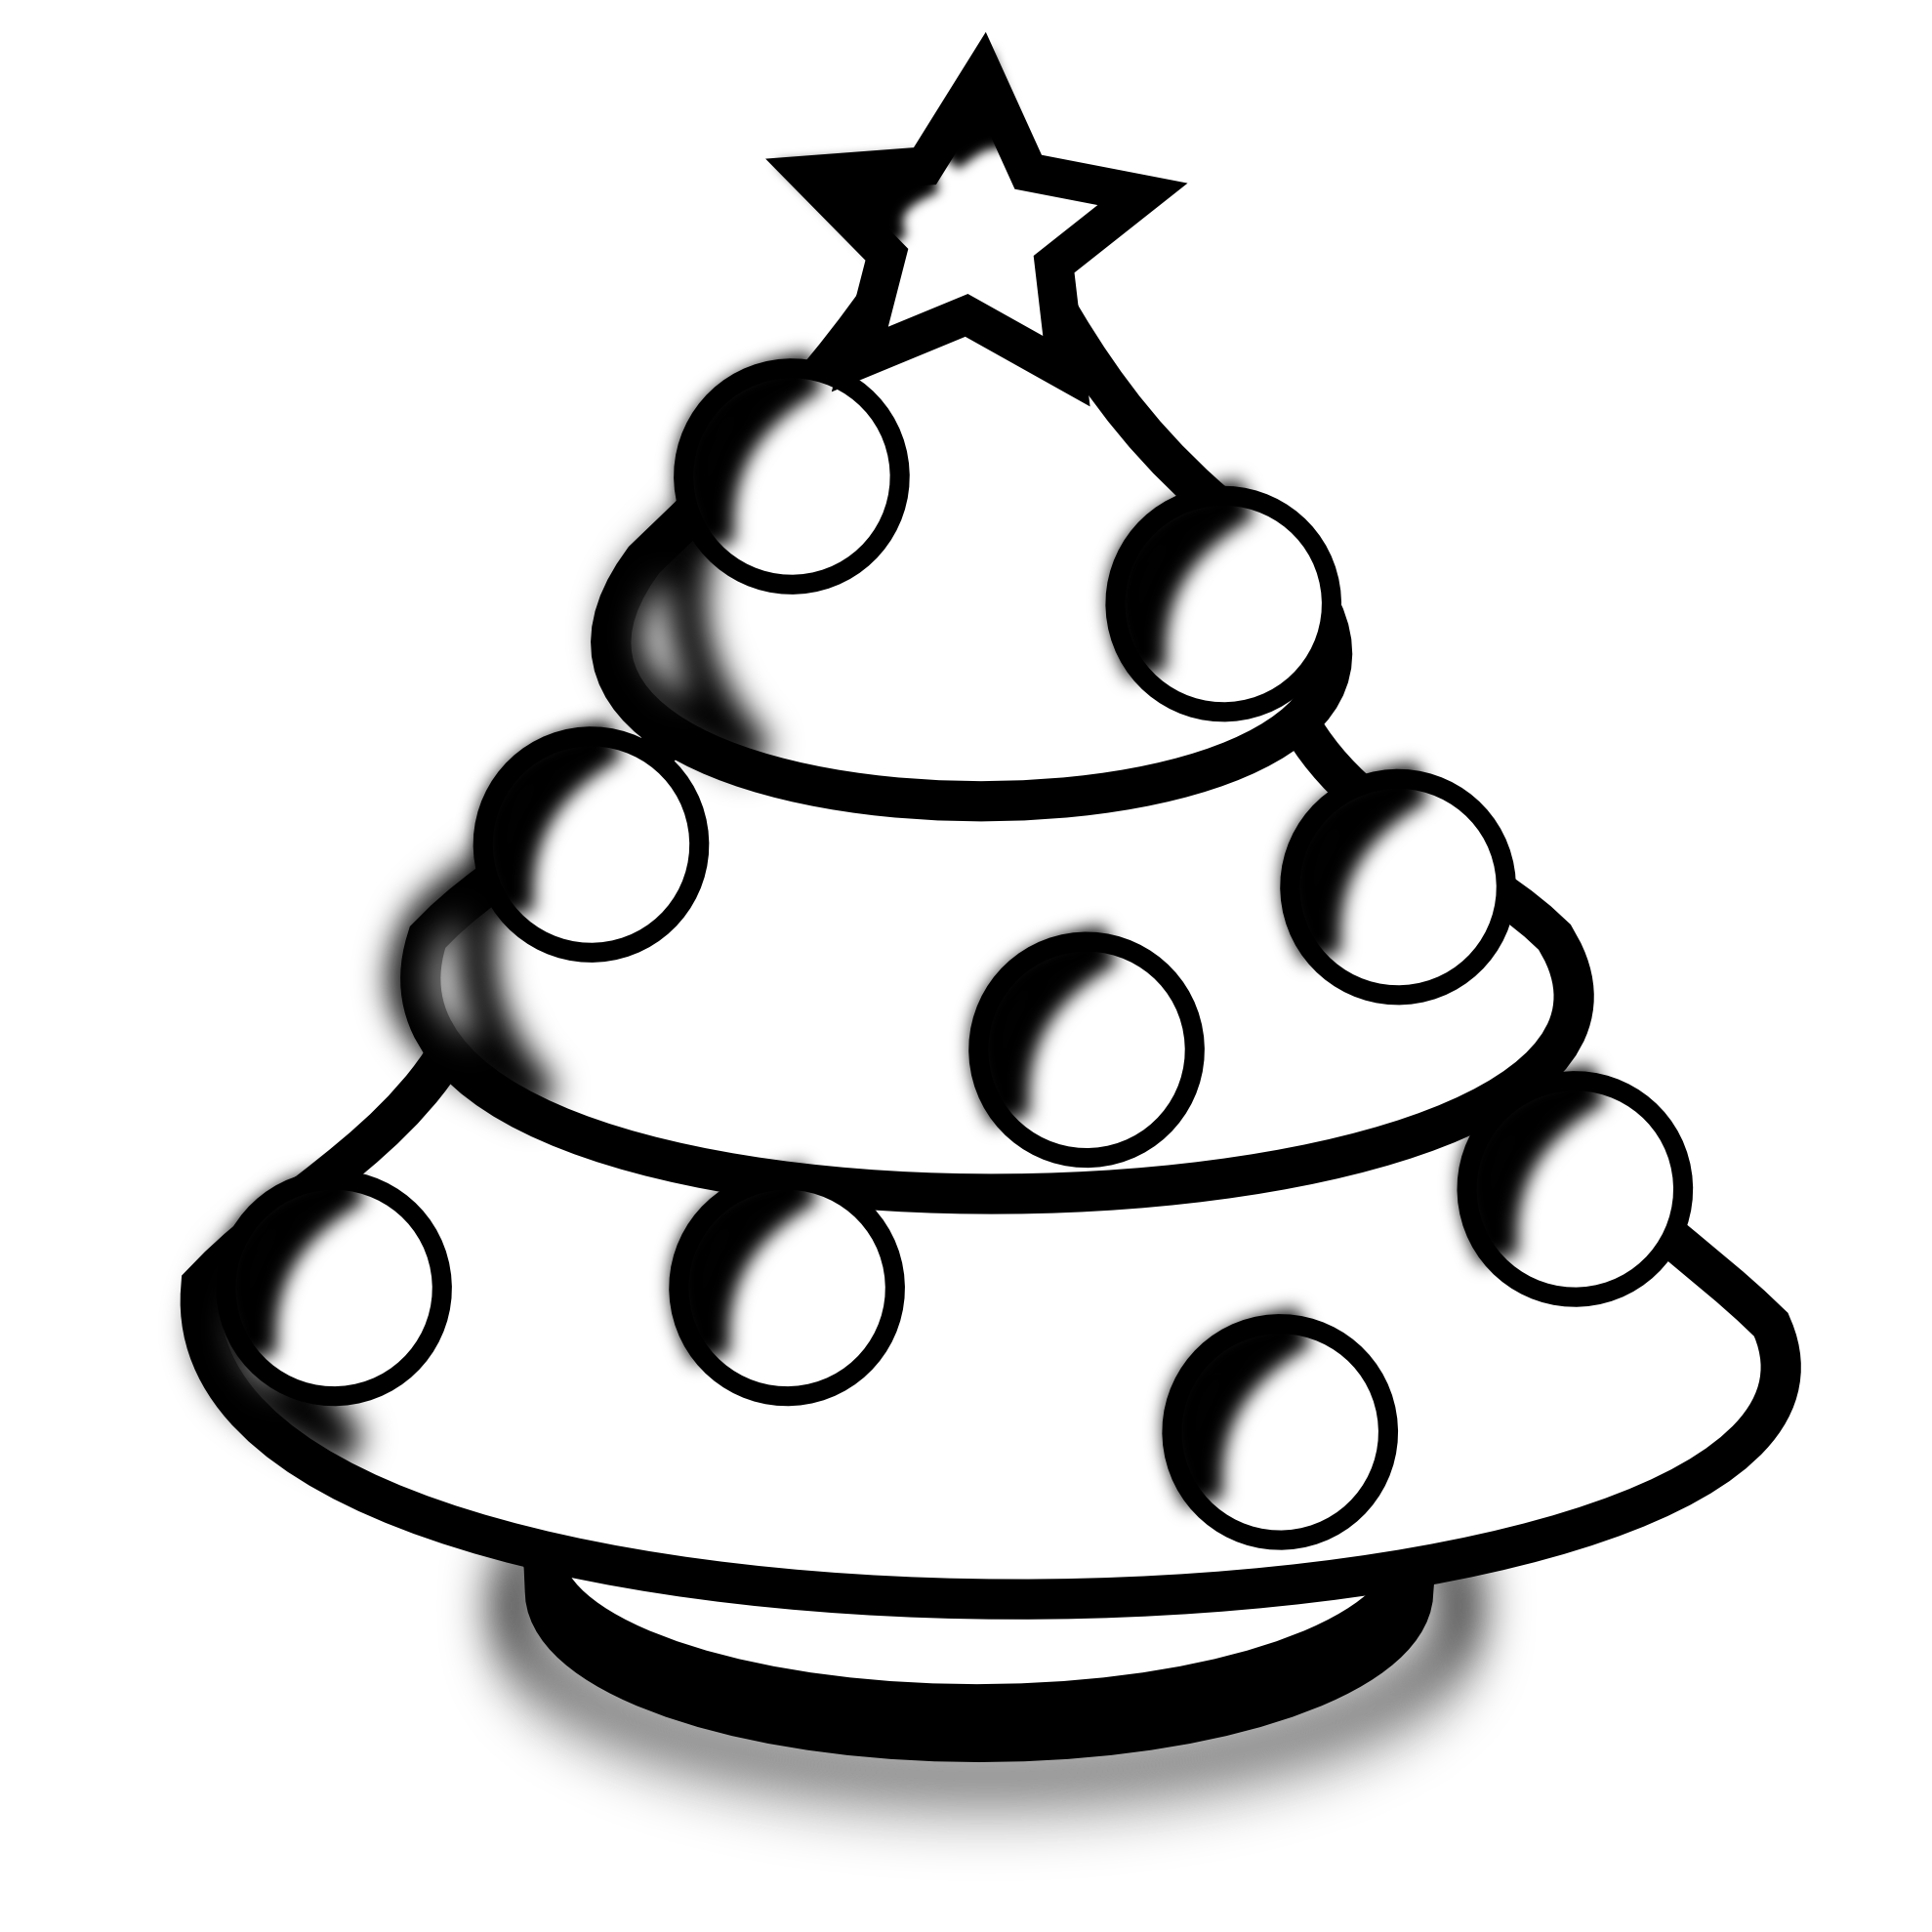 Merry Christmas Clip Art Black And White Widescreen 2 HD ...